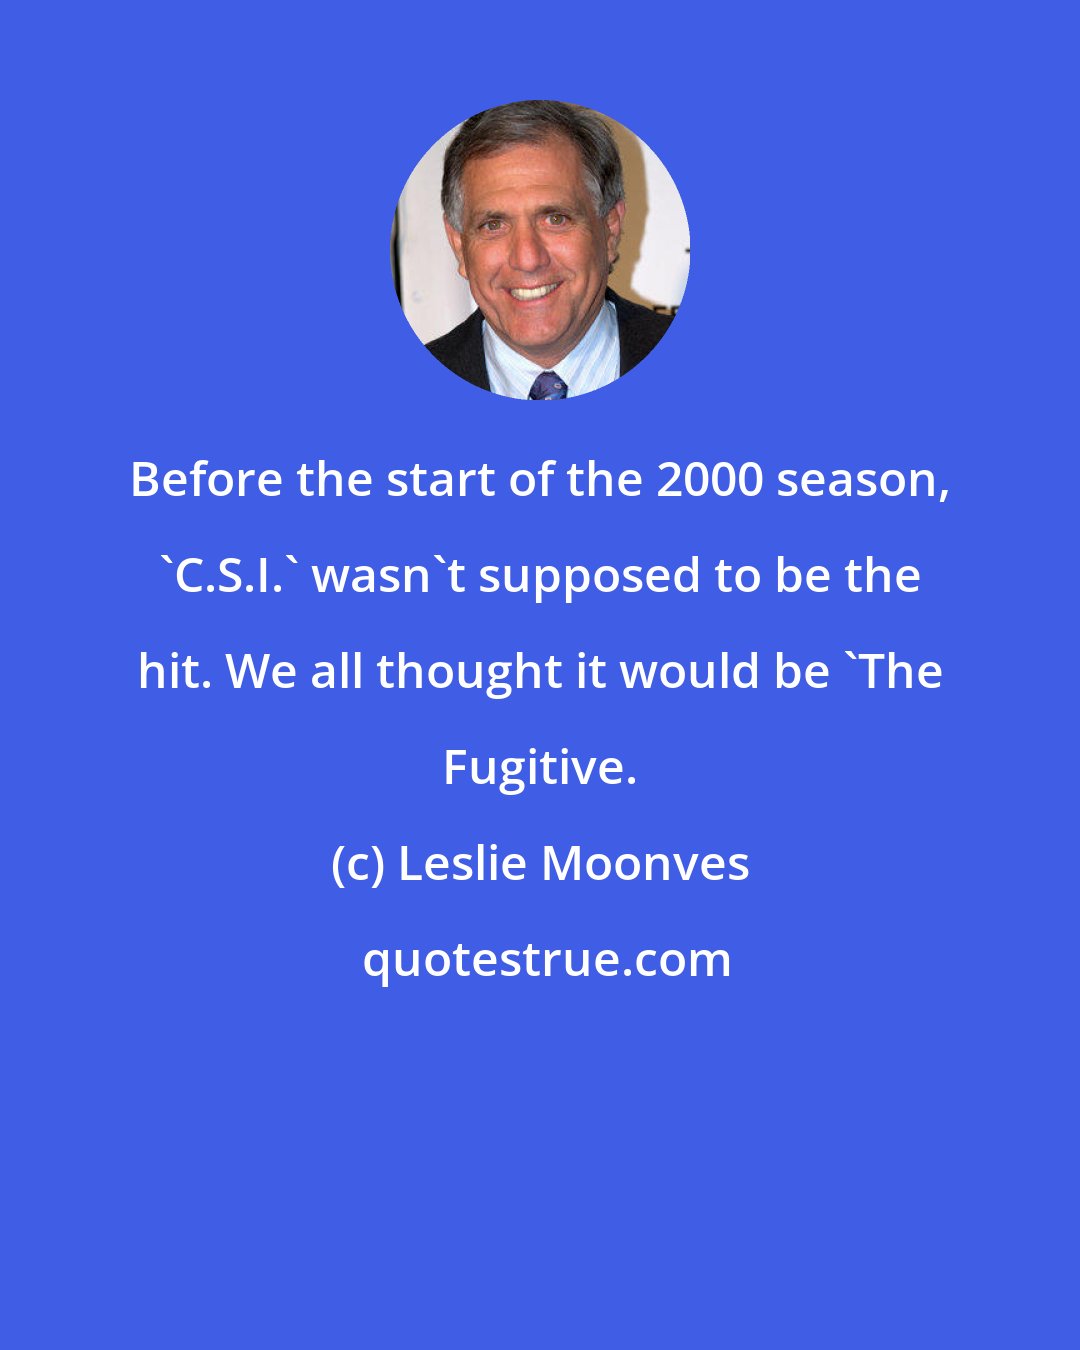 Leslie Moonves: Before the start of the 2000 season, 'C.S.I.' wasn't supposed to be the hit. We all thought it would be 'The Fugitive.